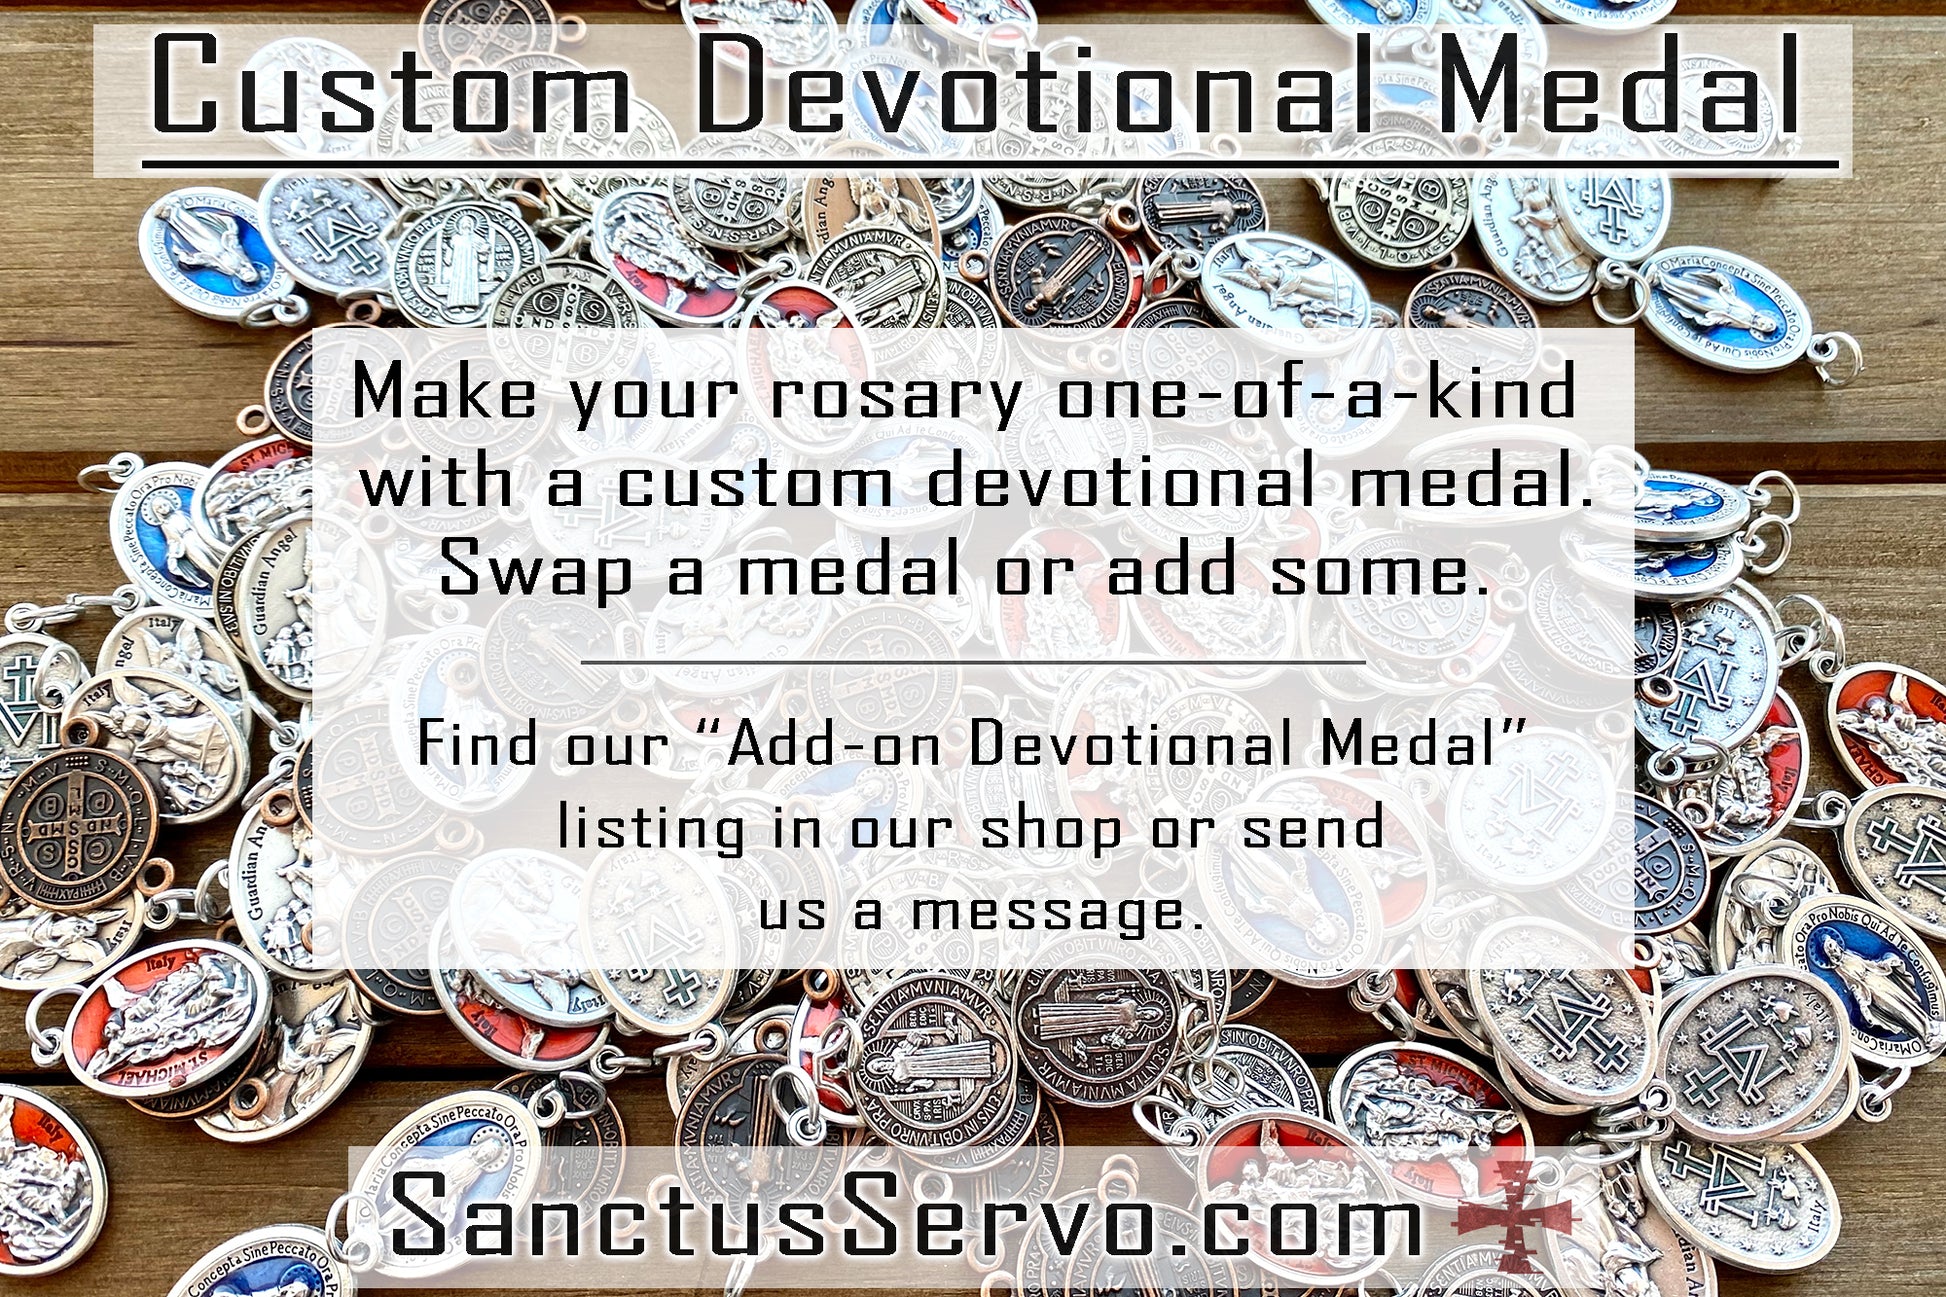 A picture showing that custom devotional medals are available for sale to be added to any rosary.